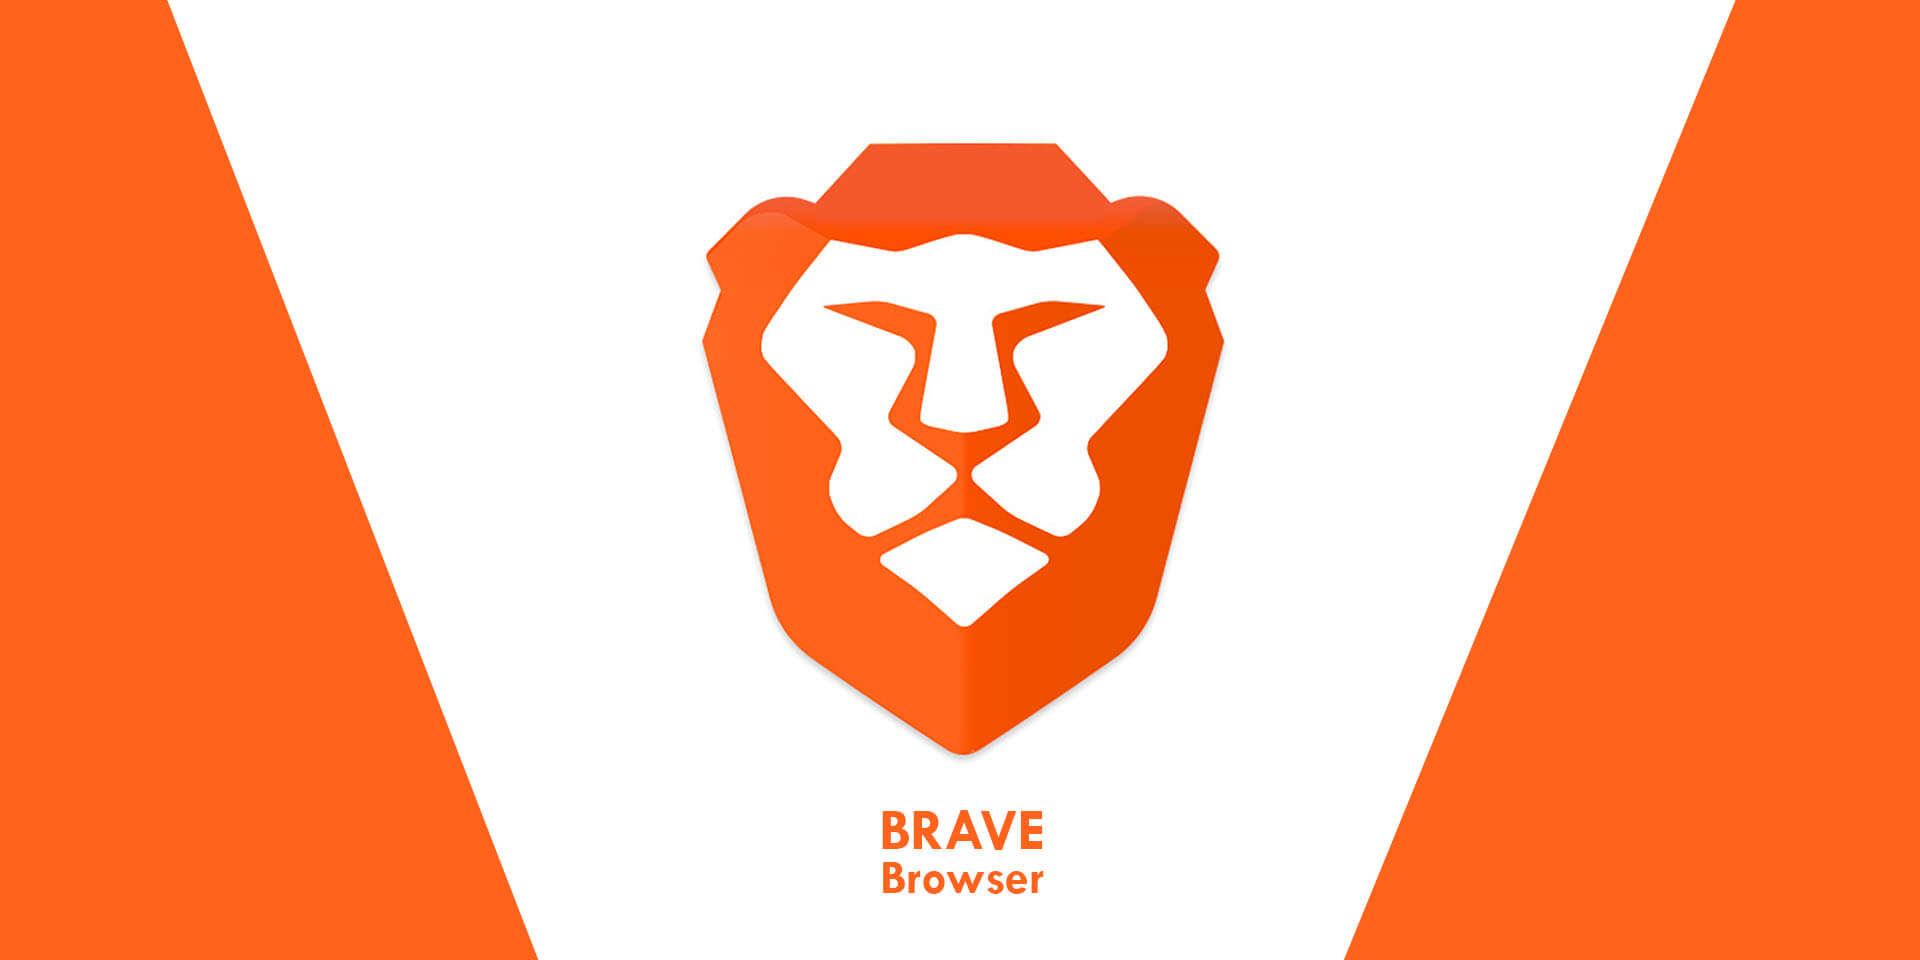 Brave Browser—Ready to give tough time to Google Chrome